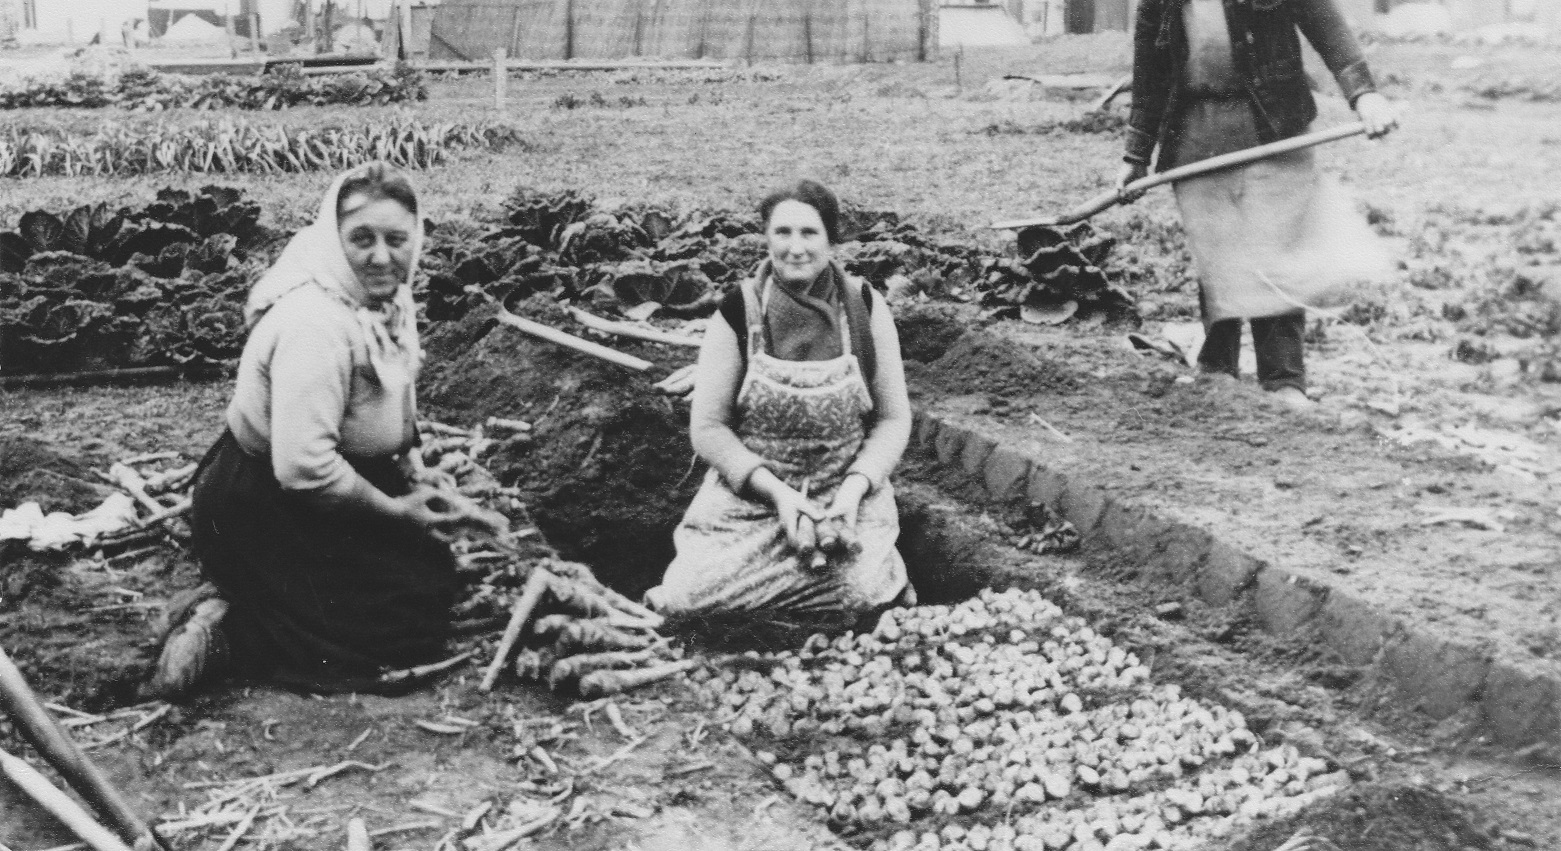 Endive farmers in the Brussels of yesteryear